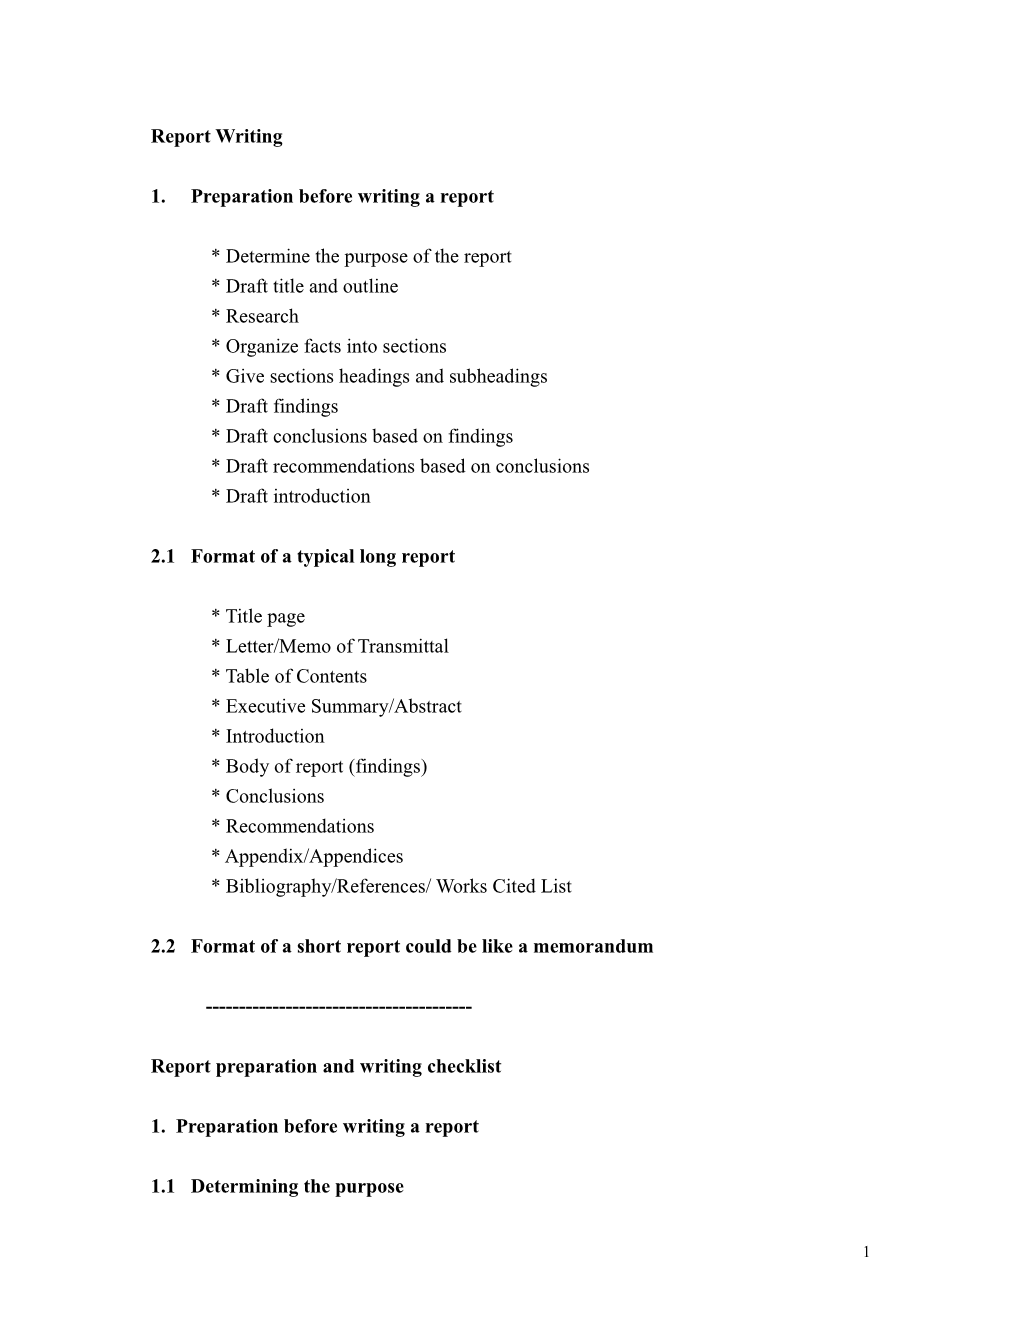 1. Preparation Before Writing a Report